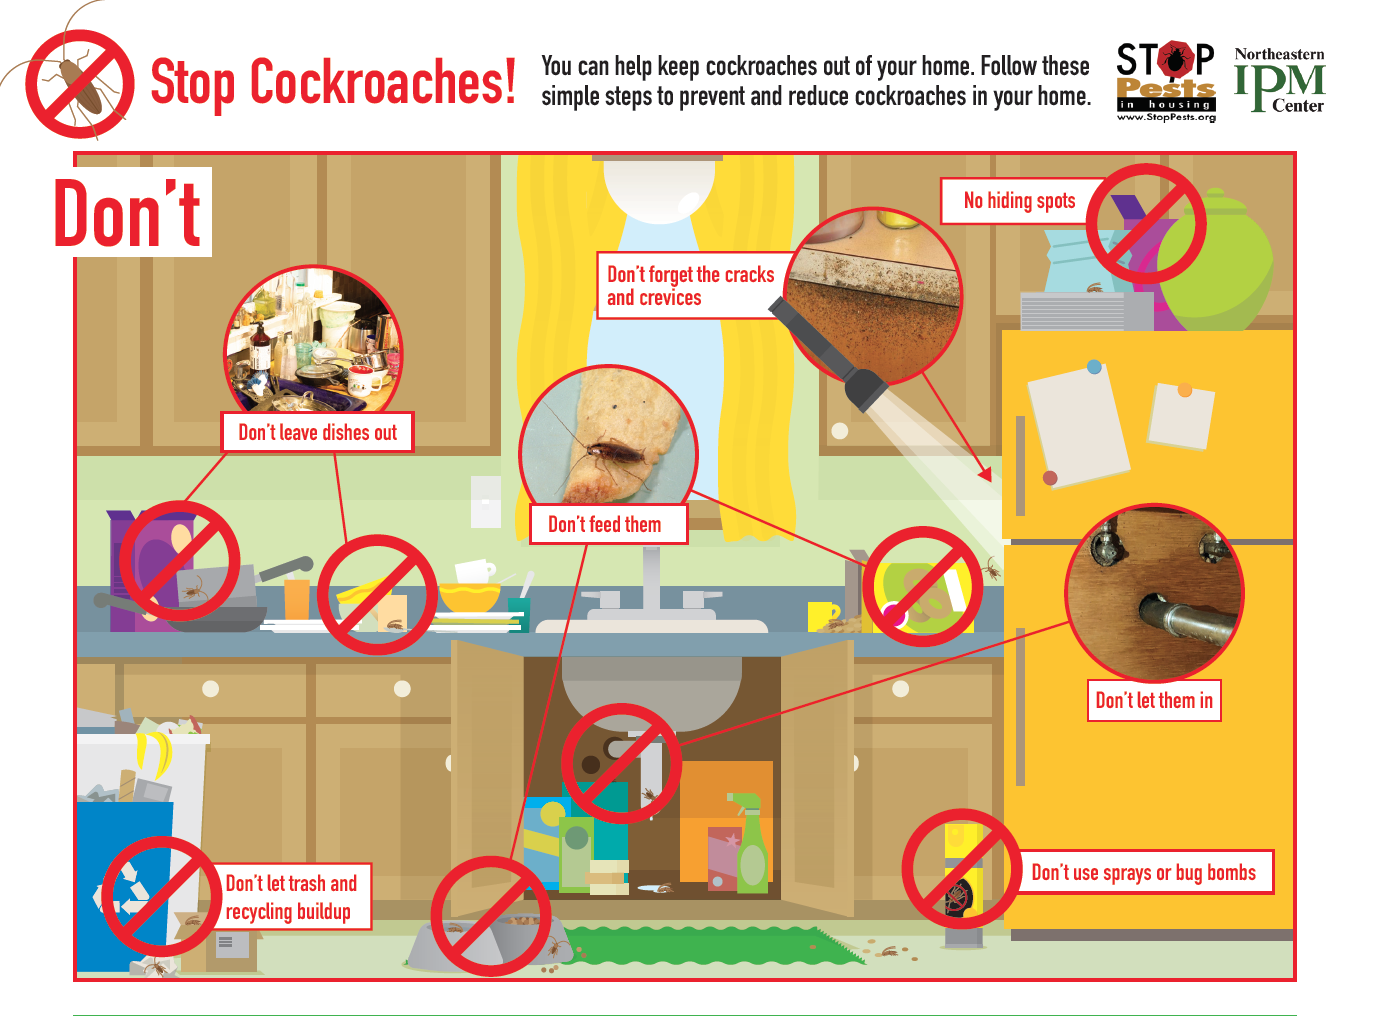 A guide with pictures shows what you should not do when preventing and controlling cockroaches